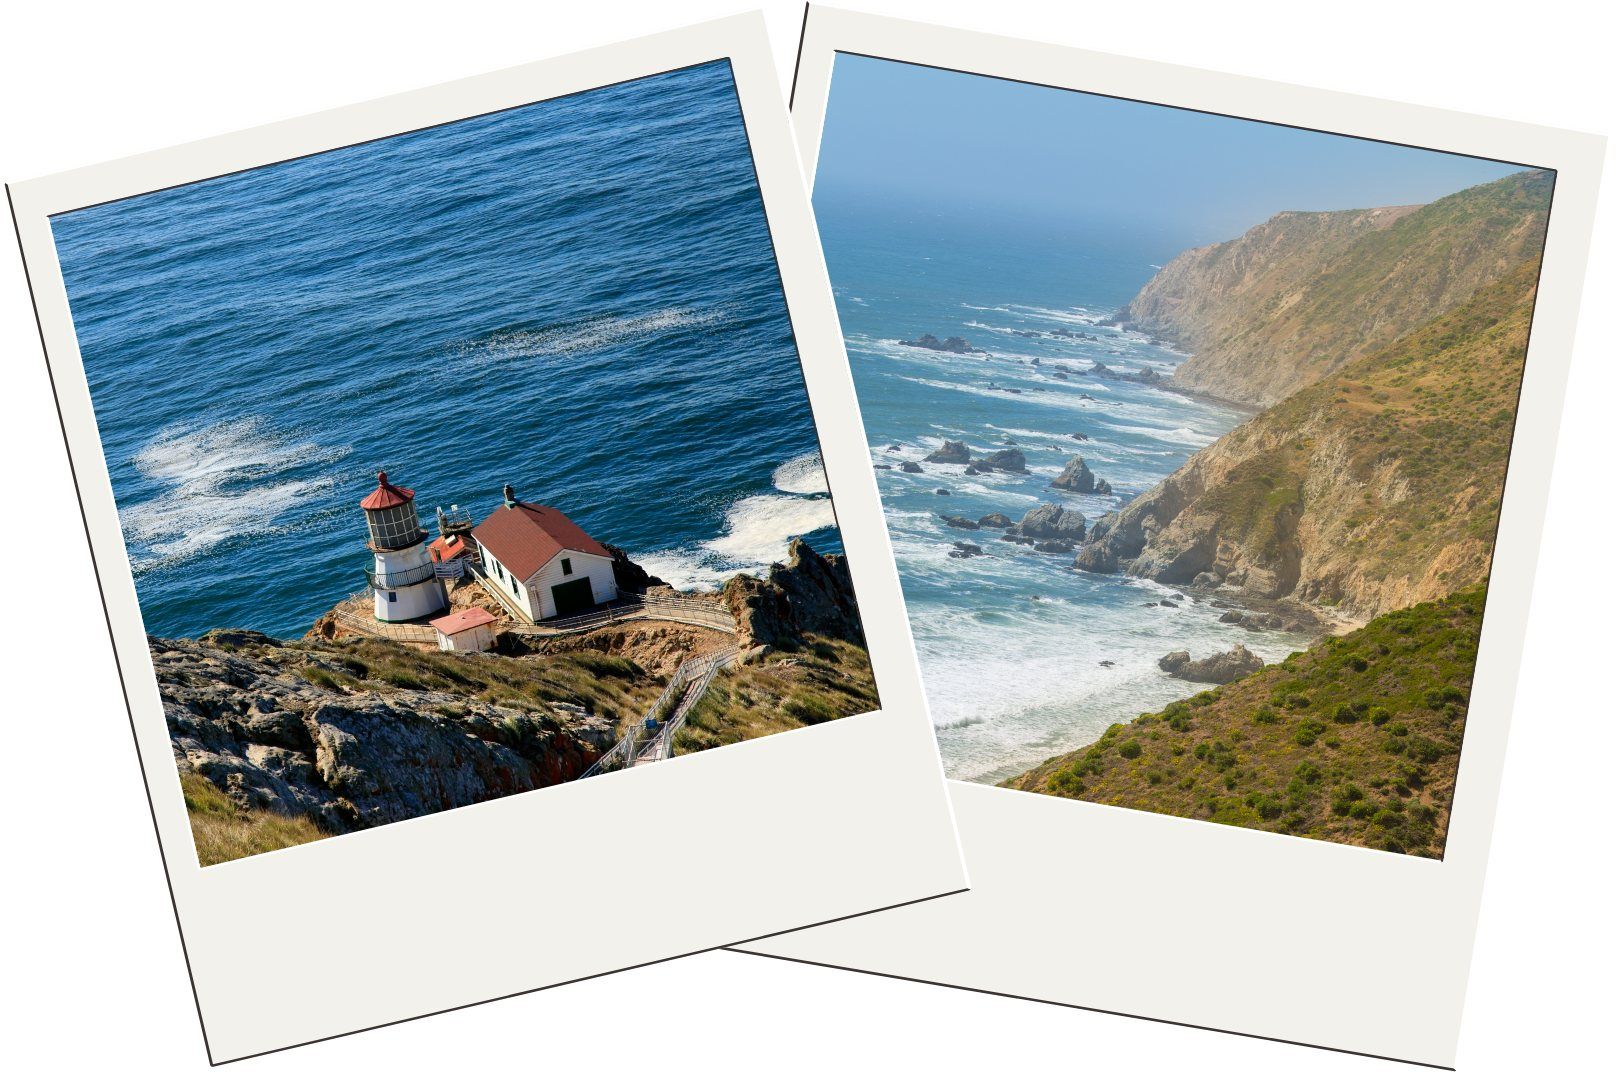 Best stops on the Pacific Coast Highway